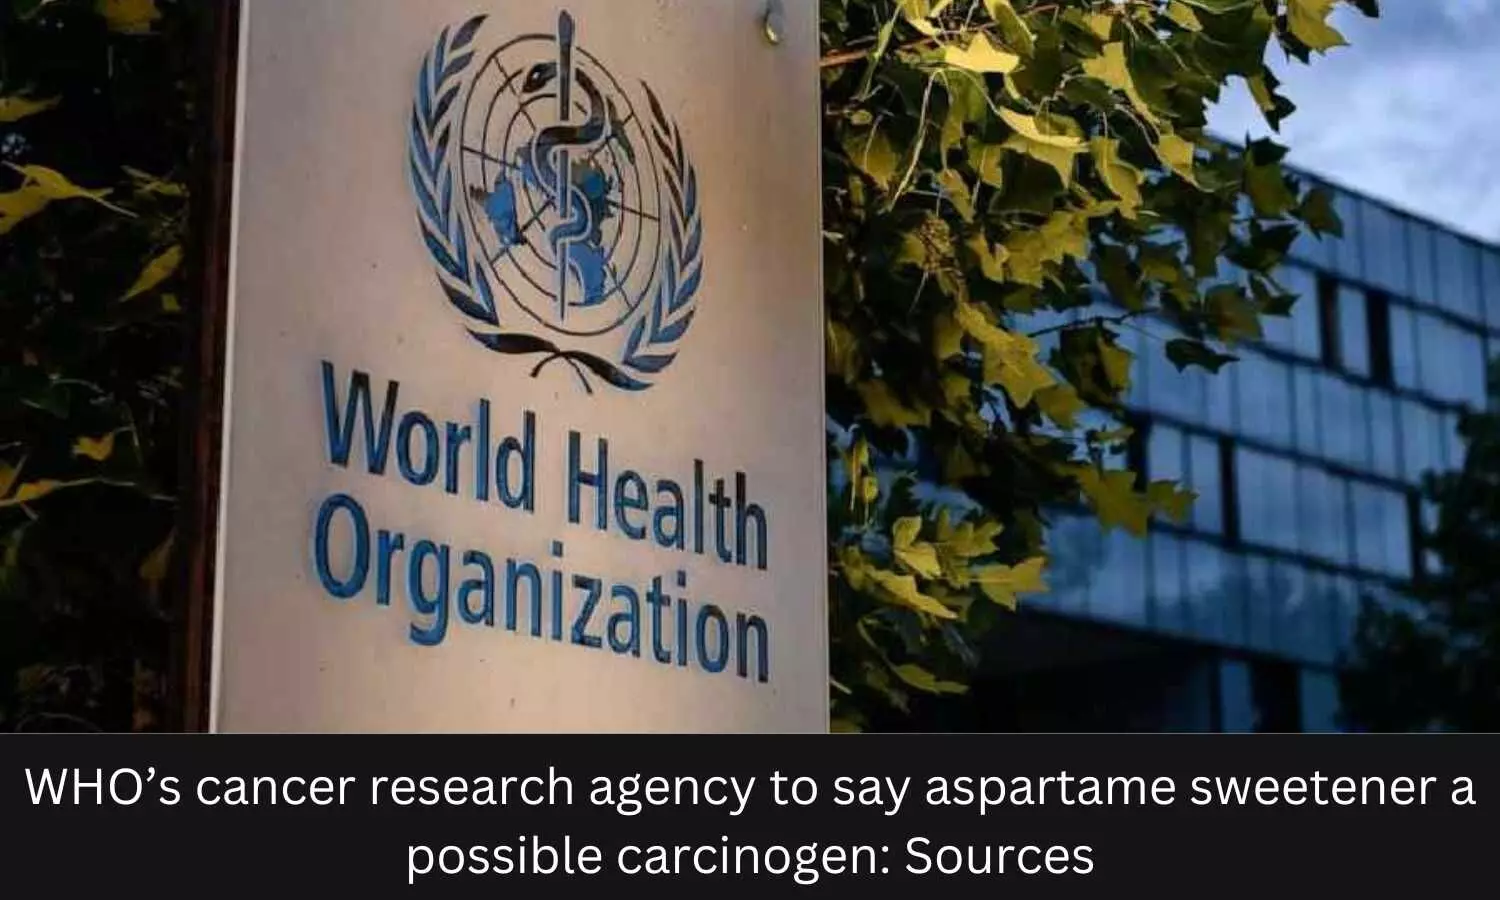 WHOs cancer research agency to say aspartame sweetener a possible carcinogen: Sources